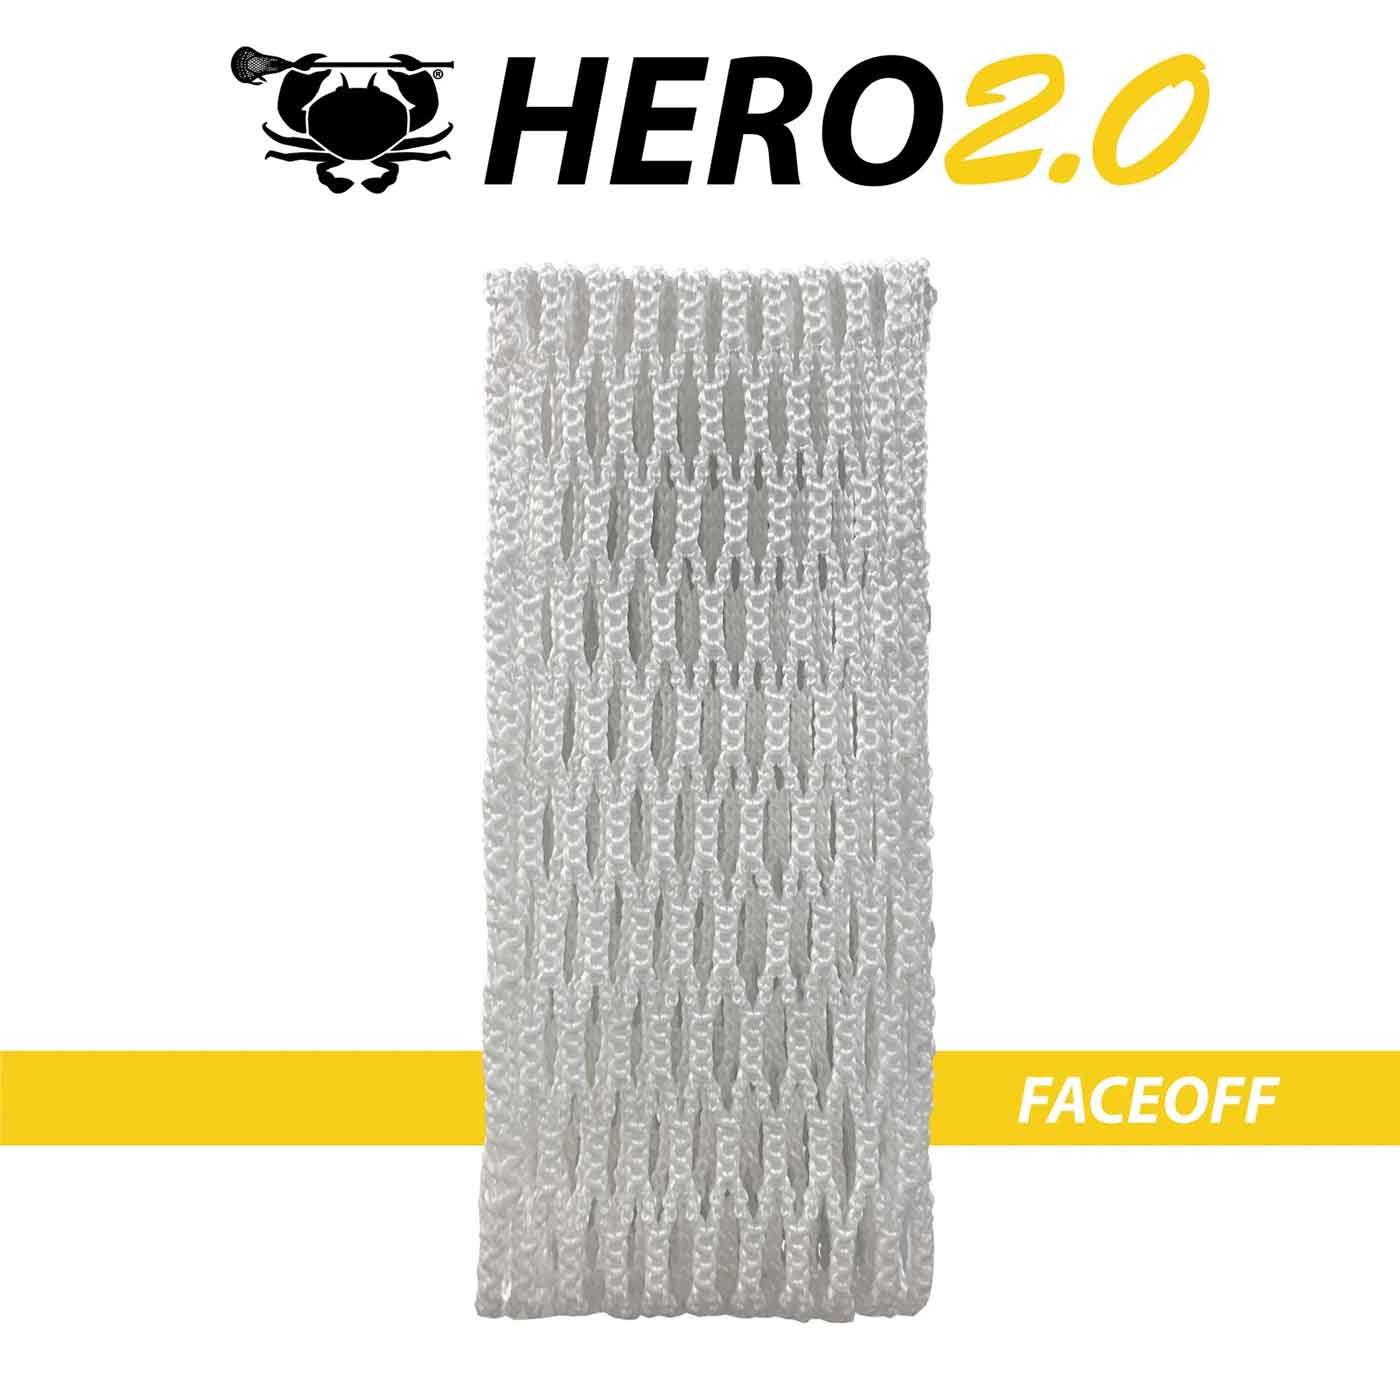 Picture of the white ECD Hero 2.0 Faceoff Lacrosse Mesh